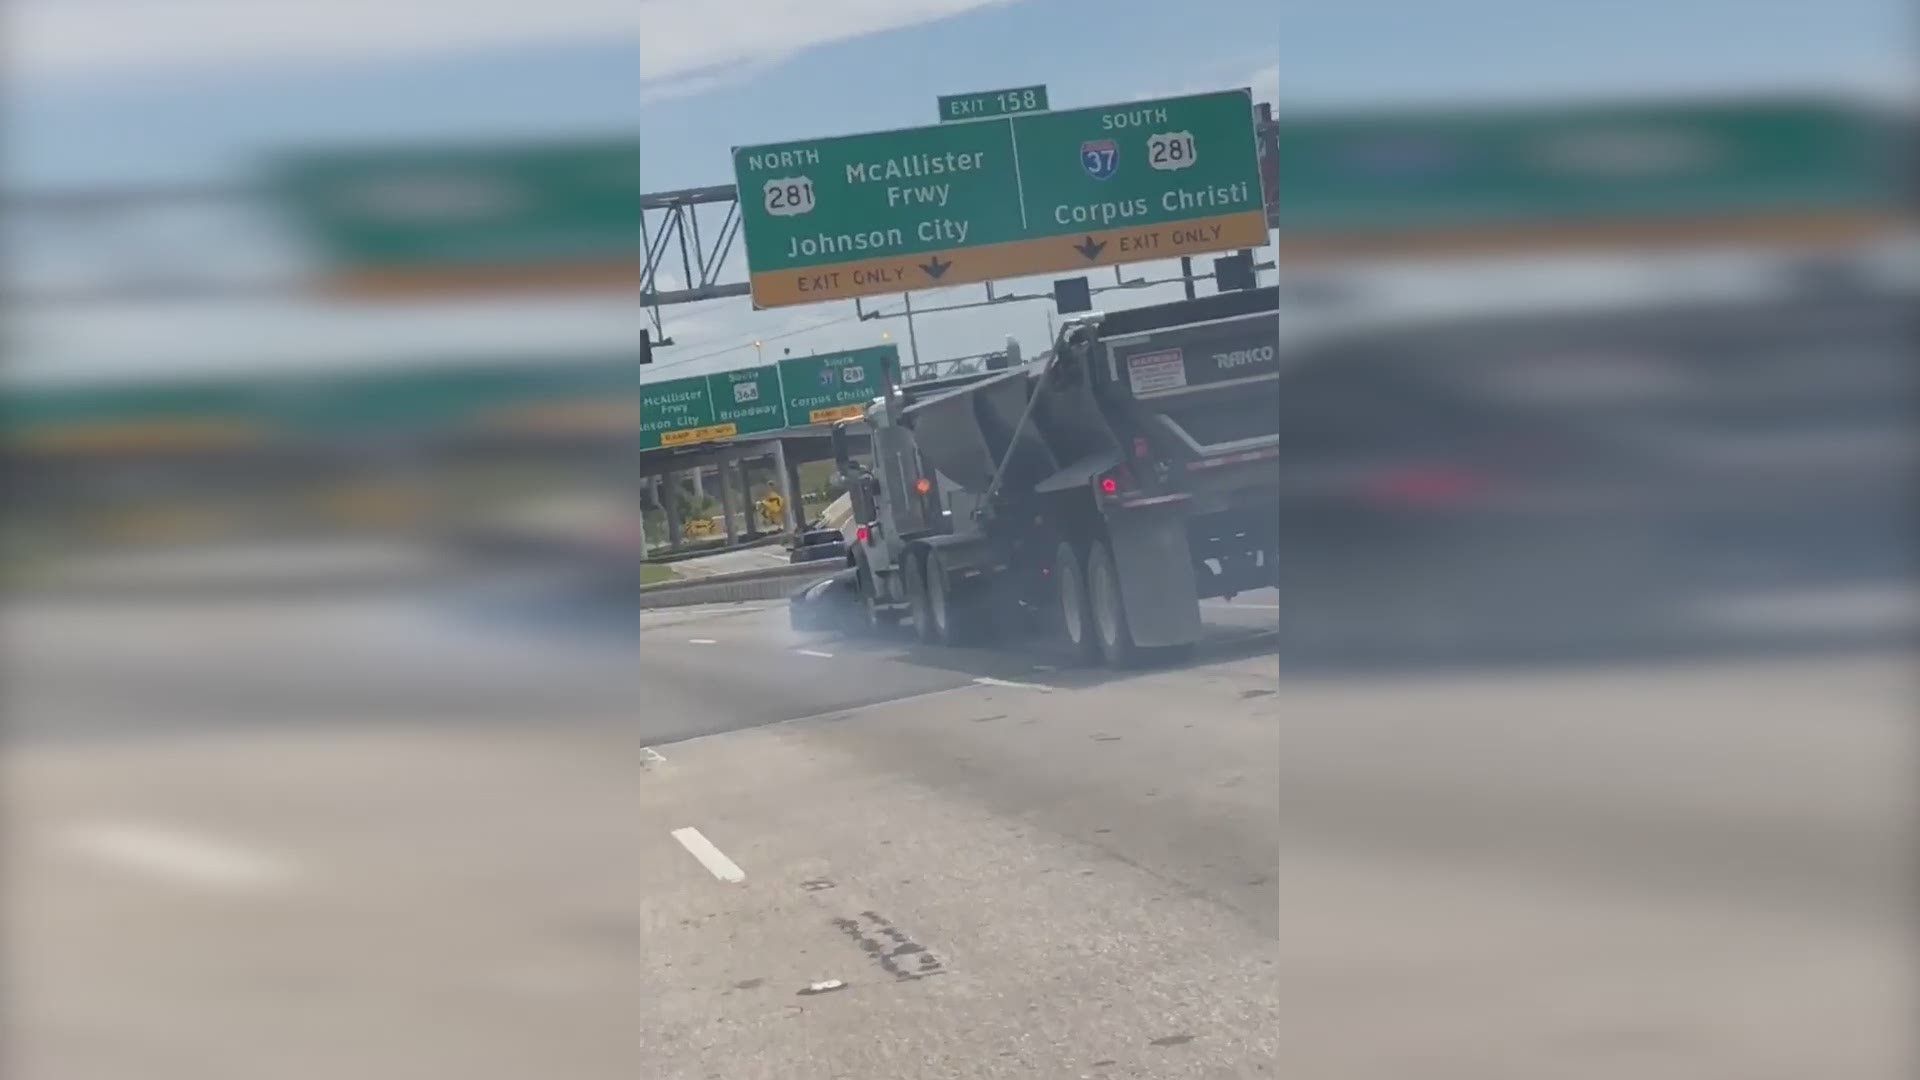 ???????????????? ??????????: A construction truck was caught on camera pushing a Mercedes along I-35 in San Antonio Monday afternoon.